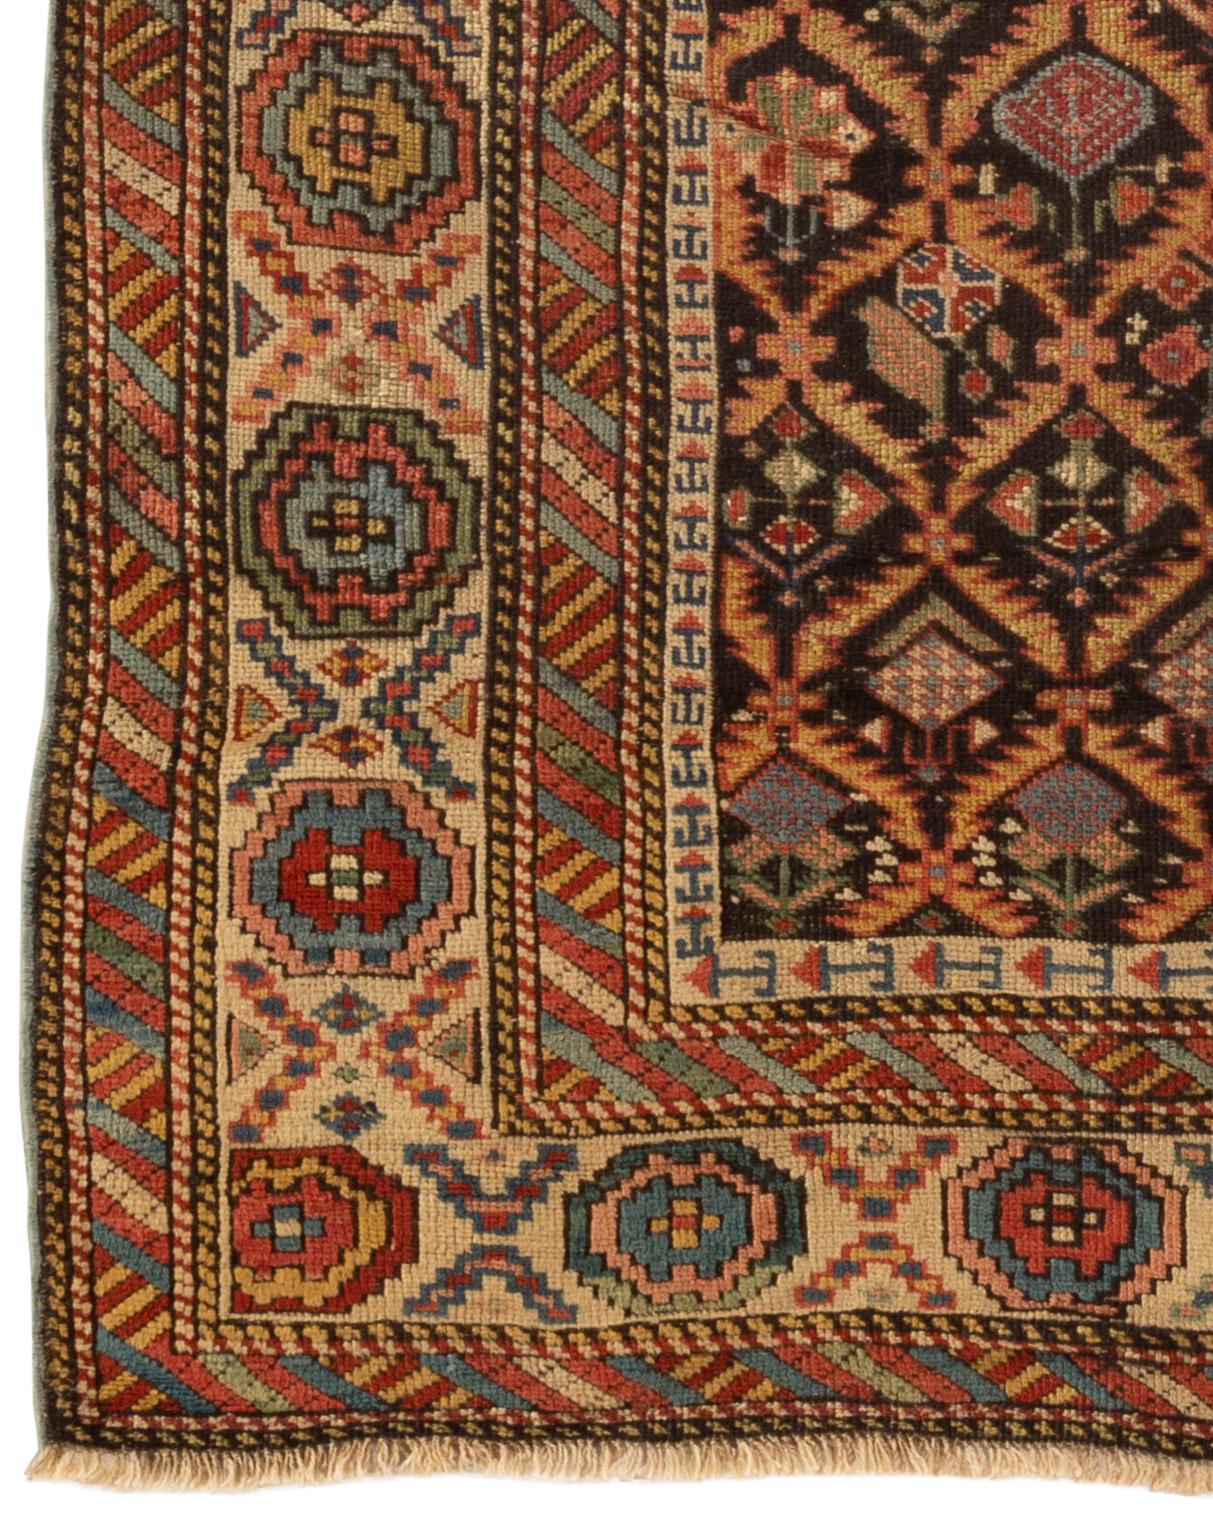 Antique Caucasian Shirvan rug, circa 1880. The navy field divided into diamonds enclosing flower heads within traditional Shirvan multiple borders framing the rug. These types of antique Caucasian rugs were woven in the eastern part of the region,